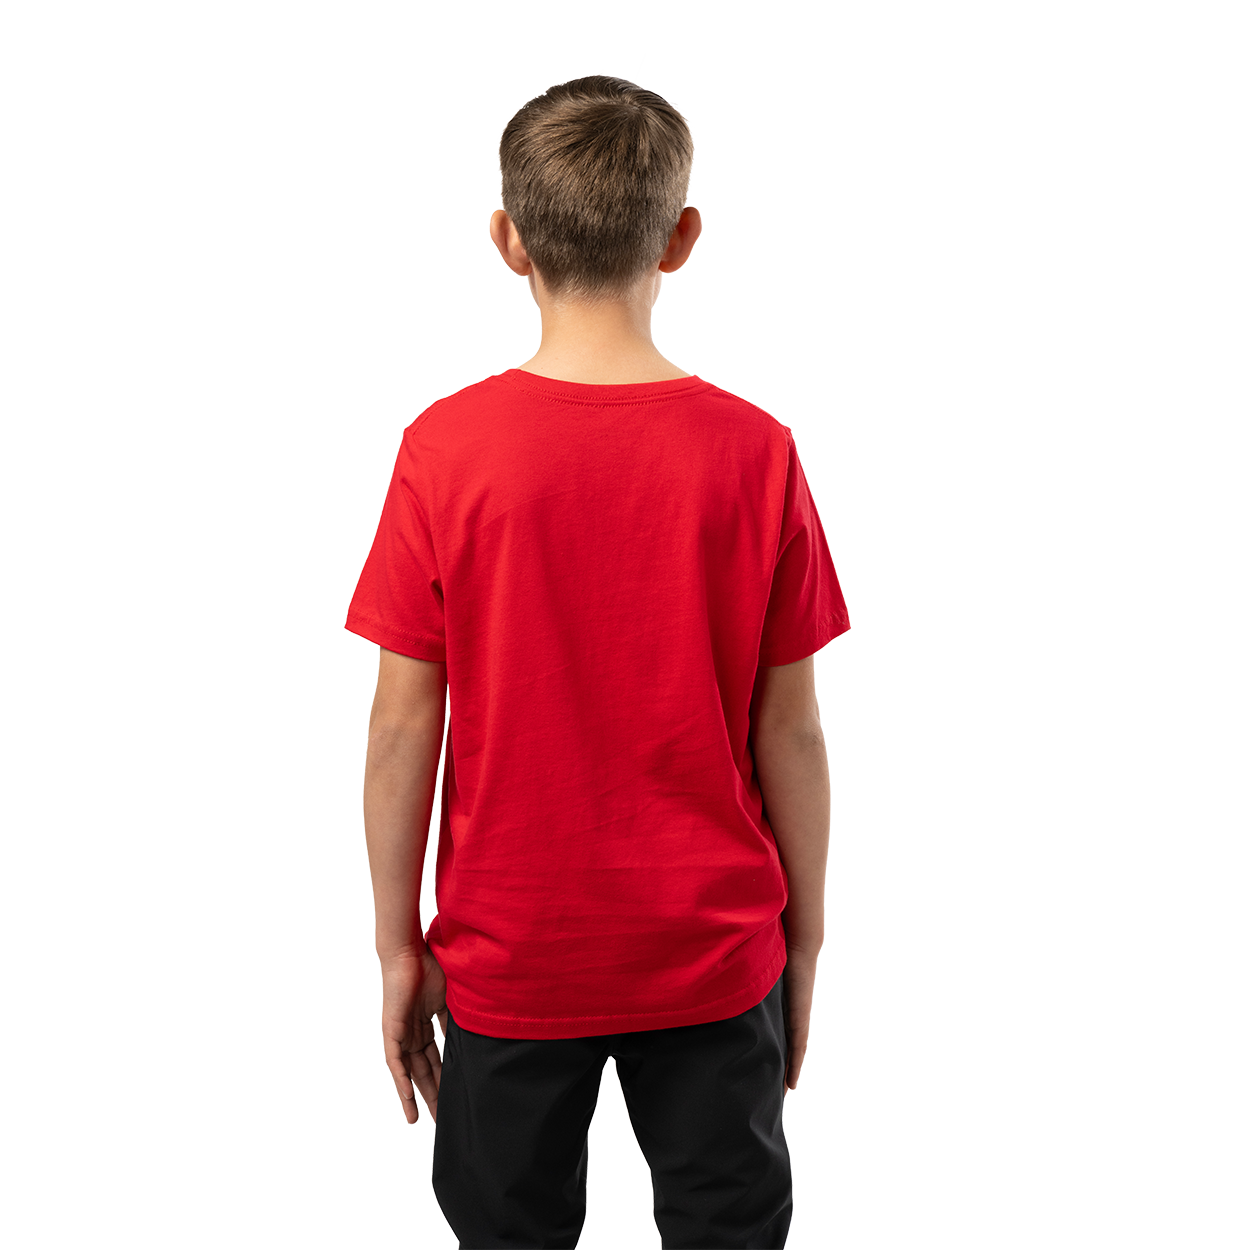 BAUER SS ICON SKATER TEE YOUTH